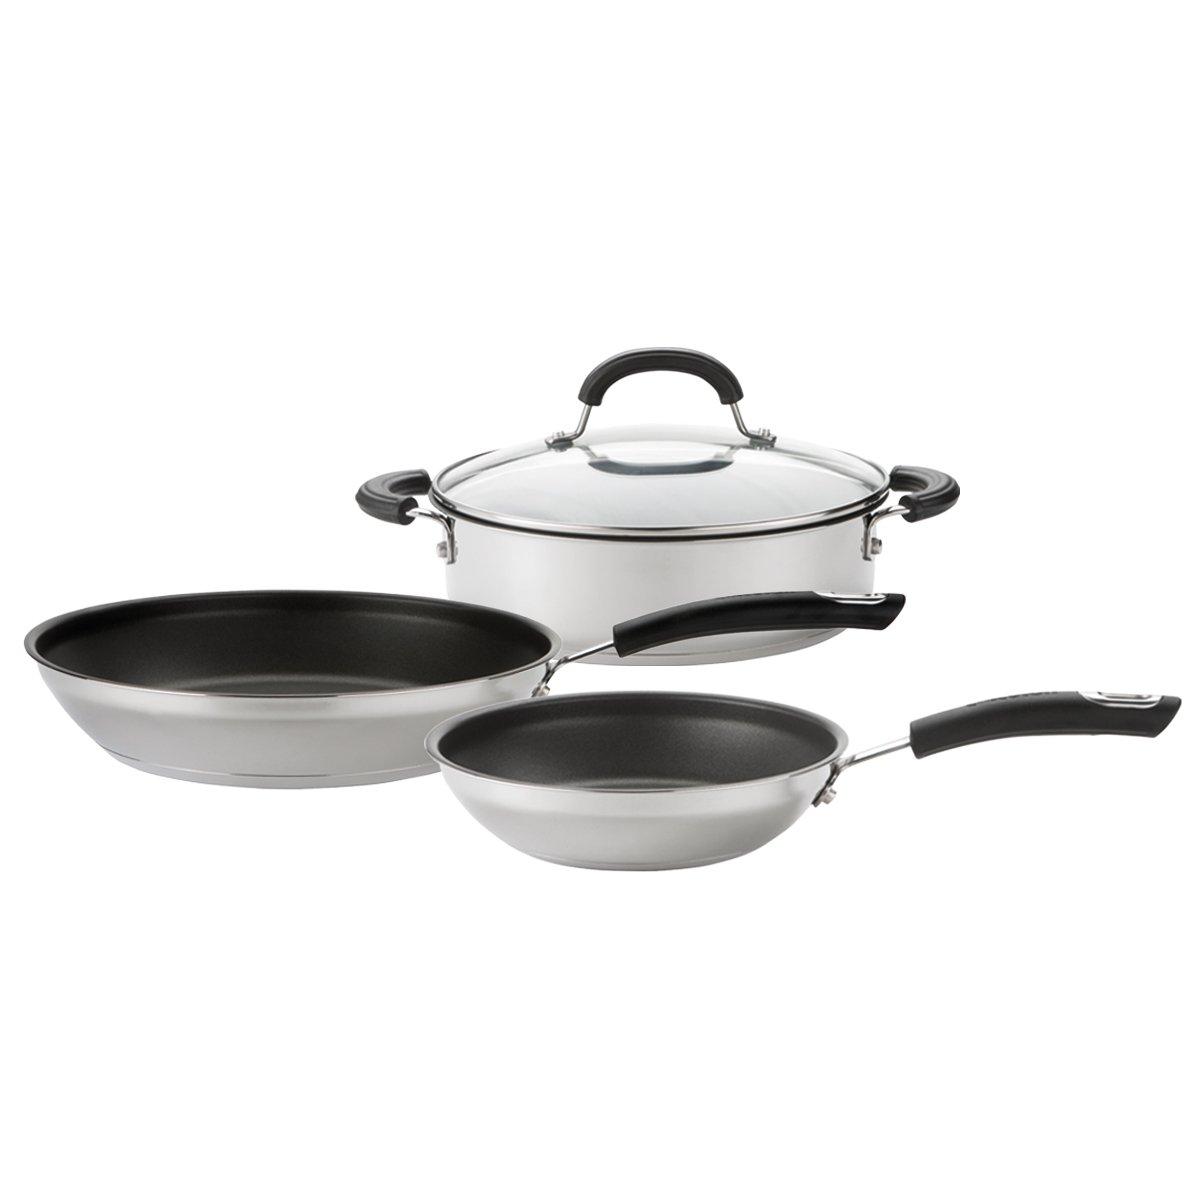 Total Skillet and Casserole Dish Set in Stainless Steel - Pack of 3